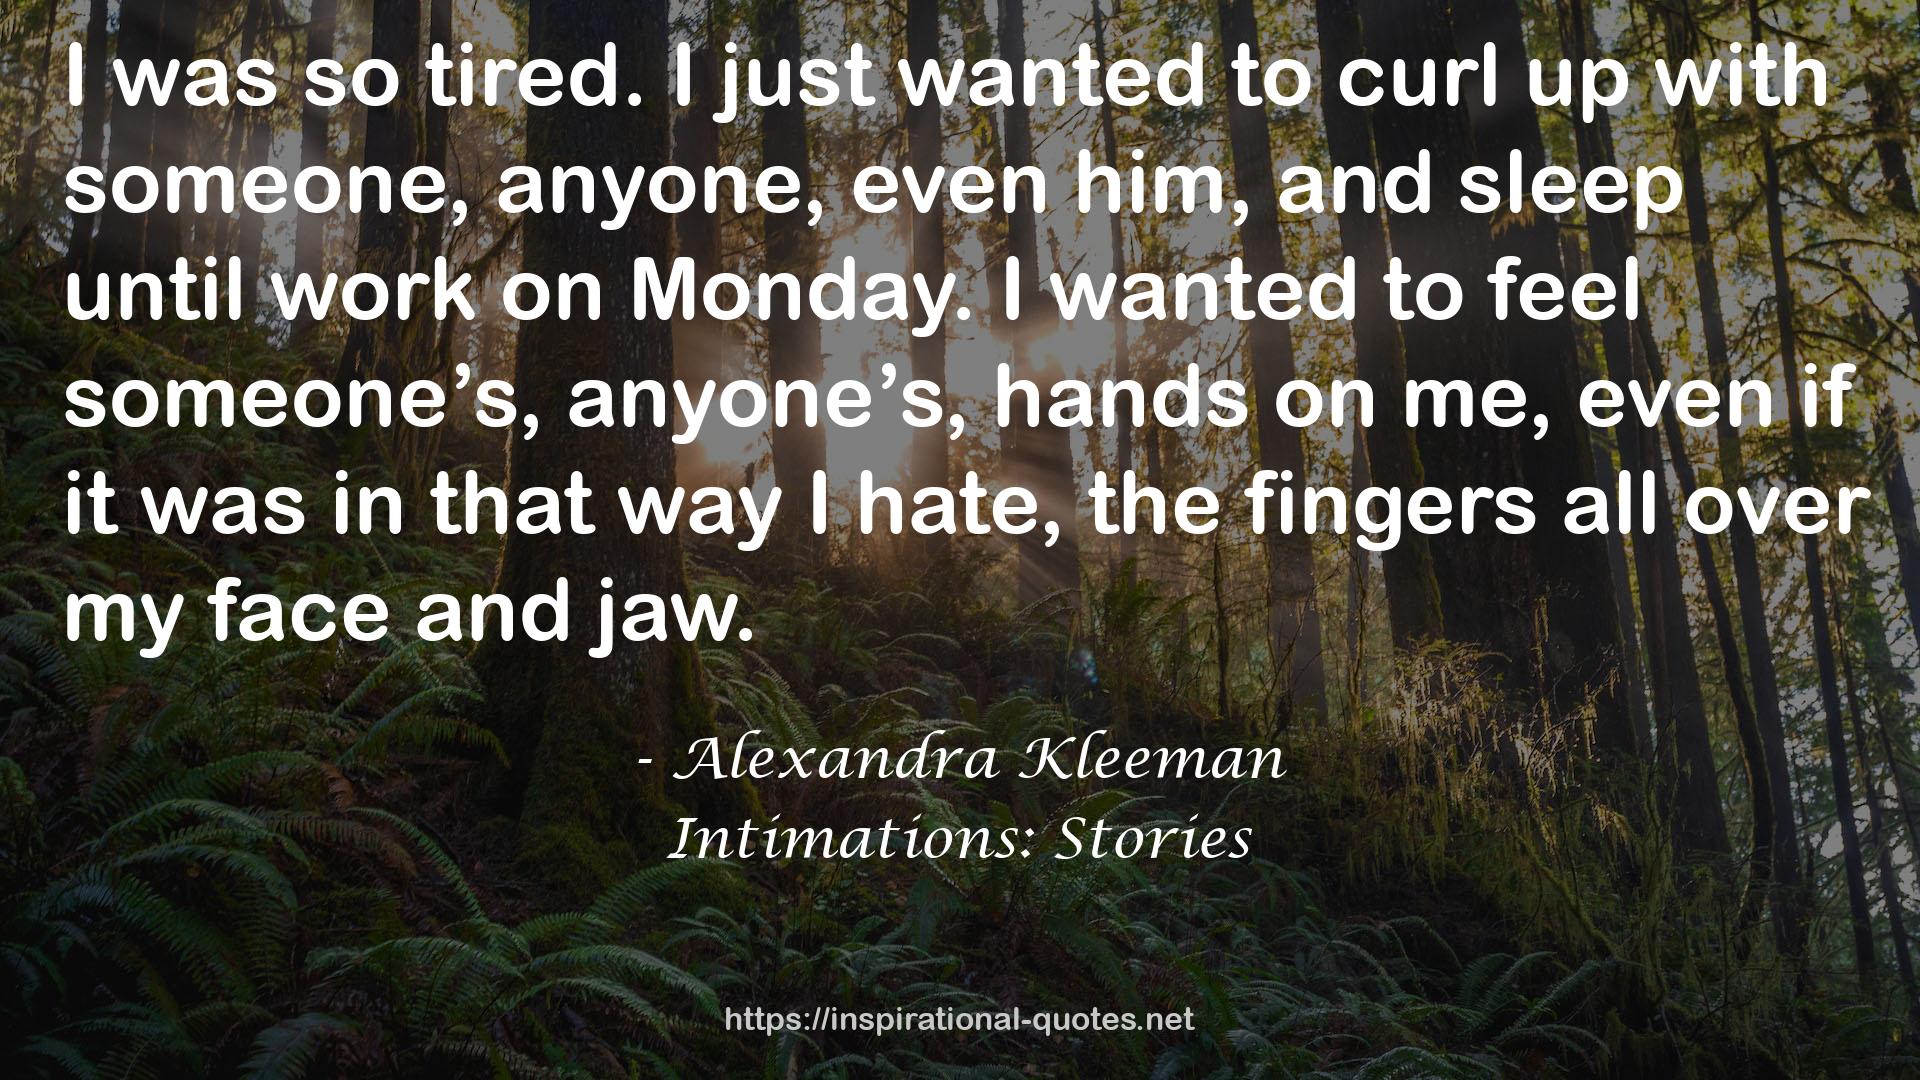 Intimations: Stories QUOTES